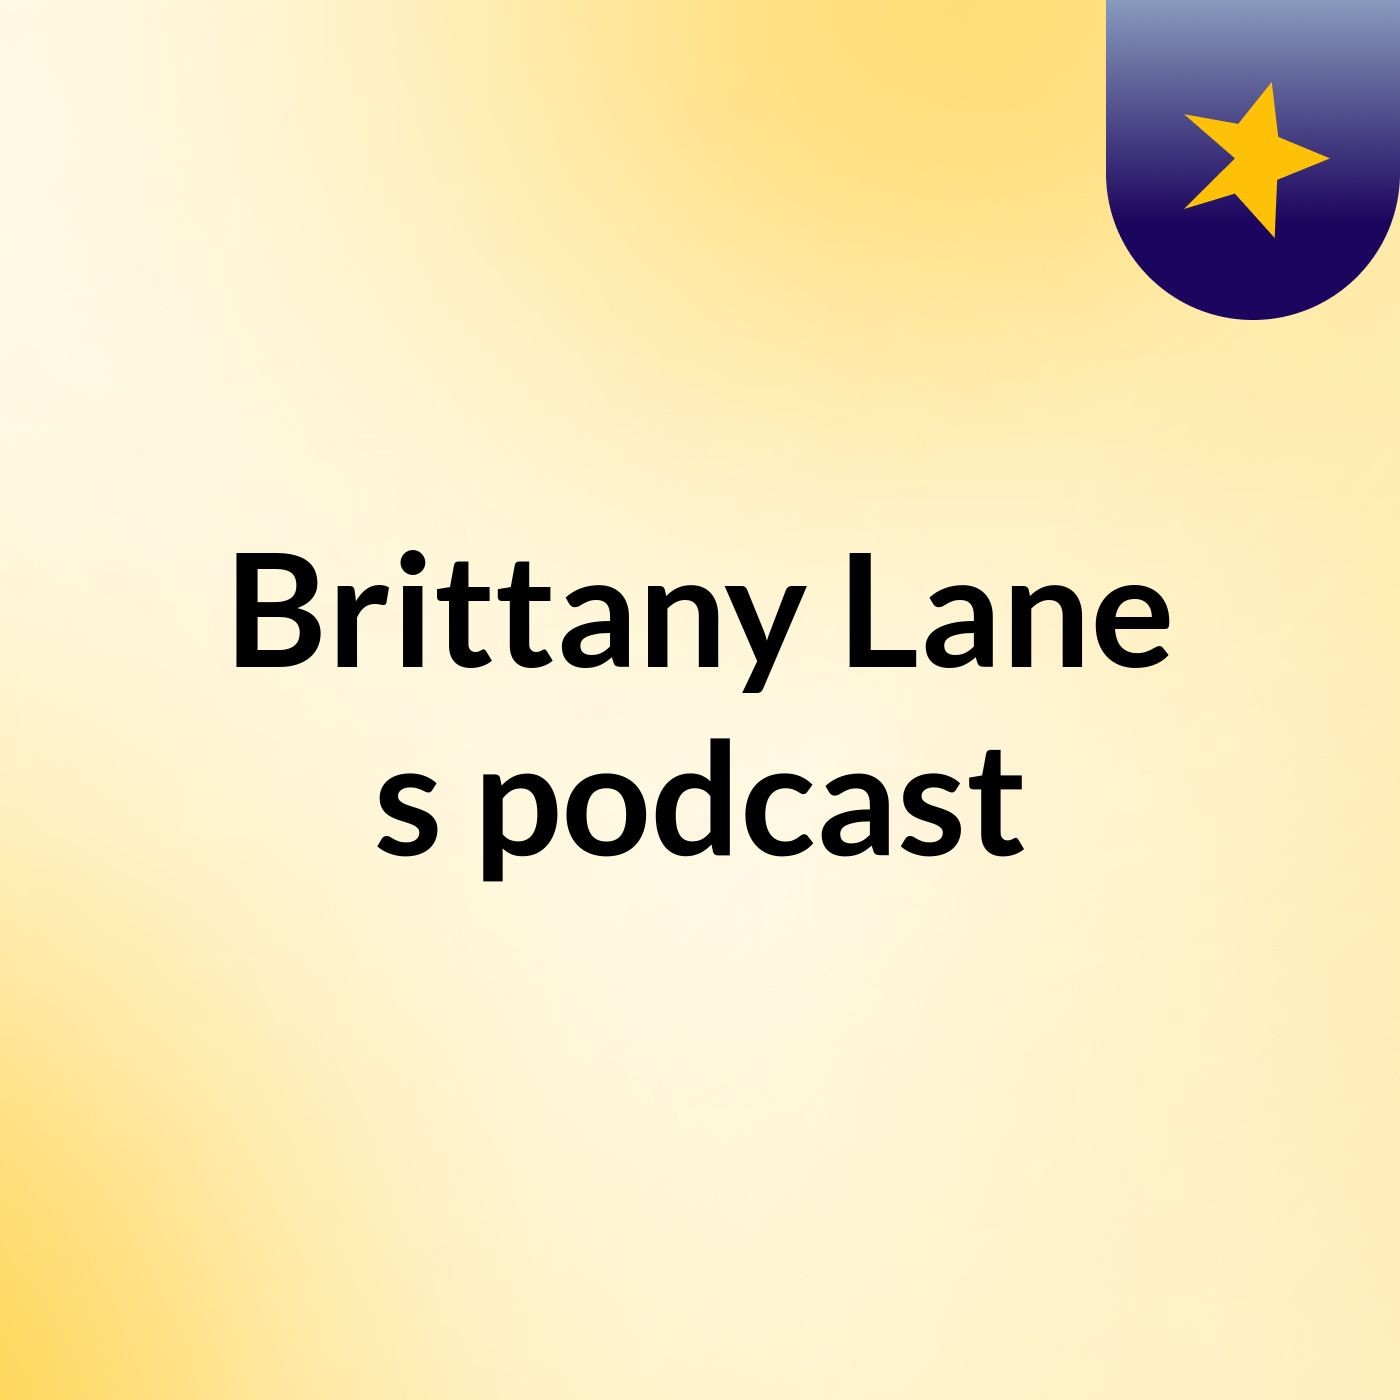 Brittany Lane's podcast